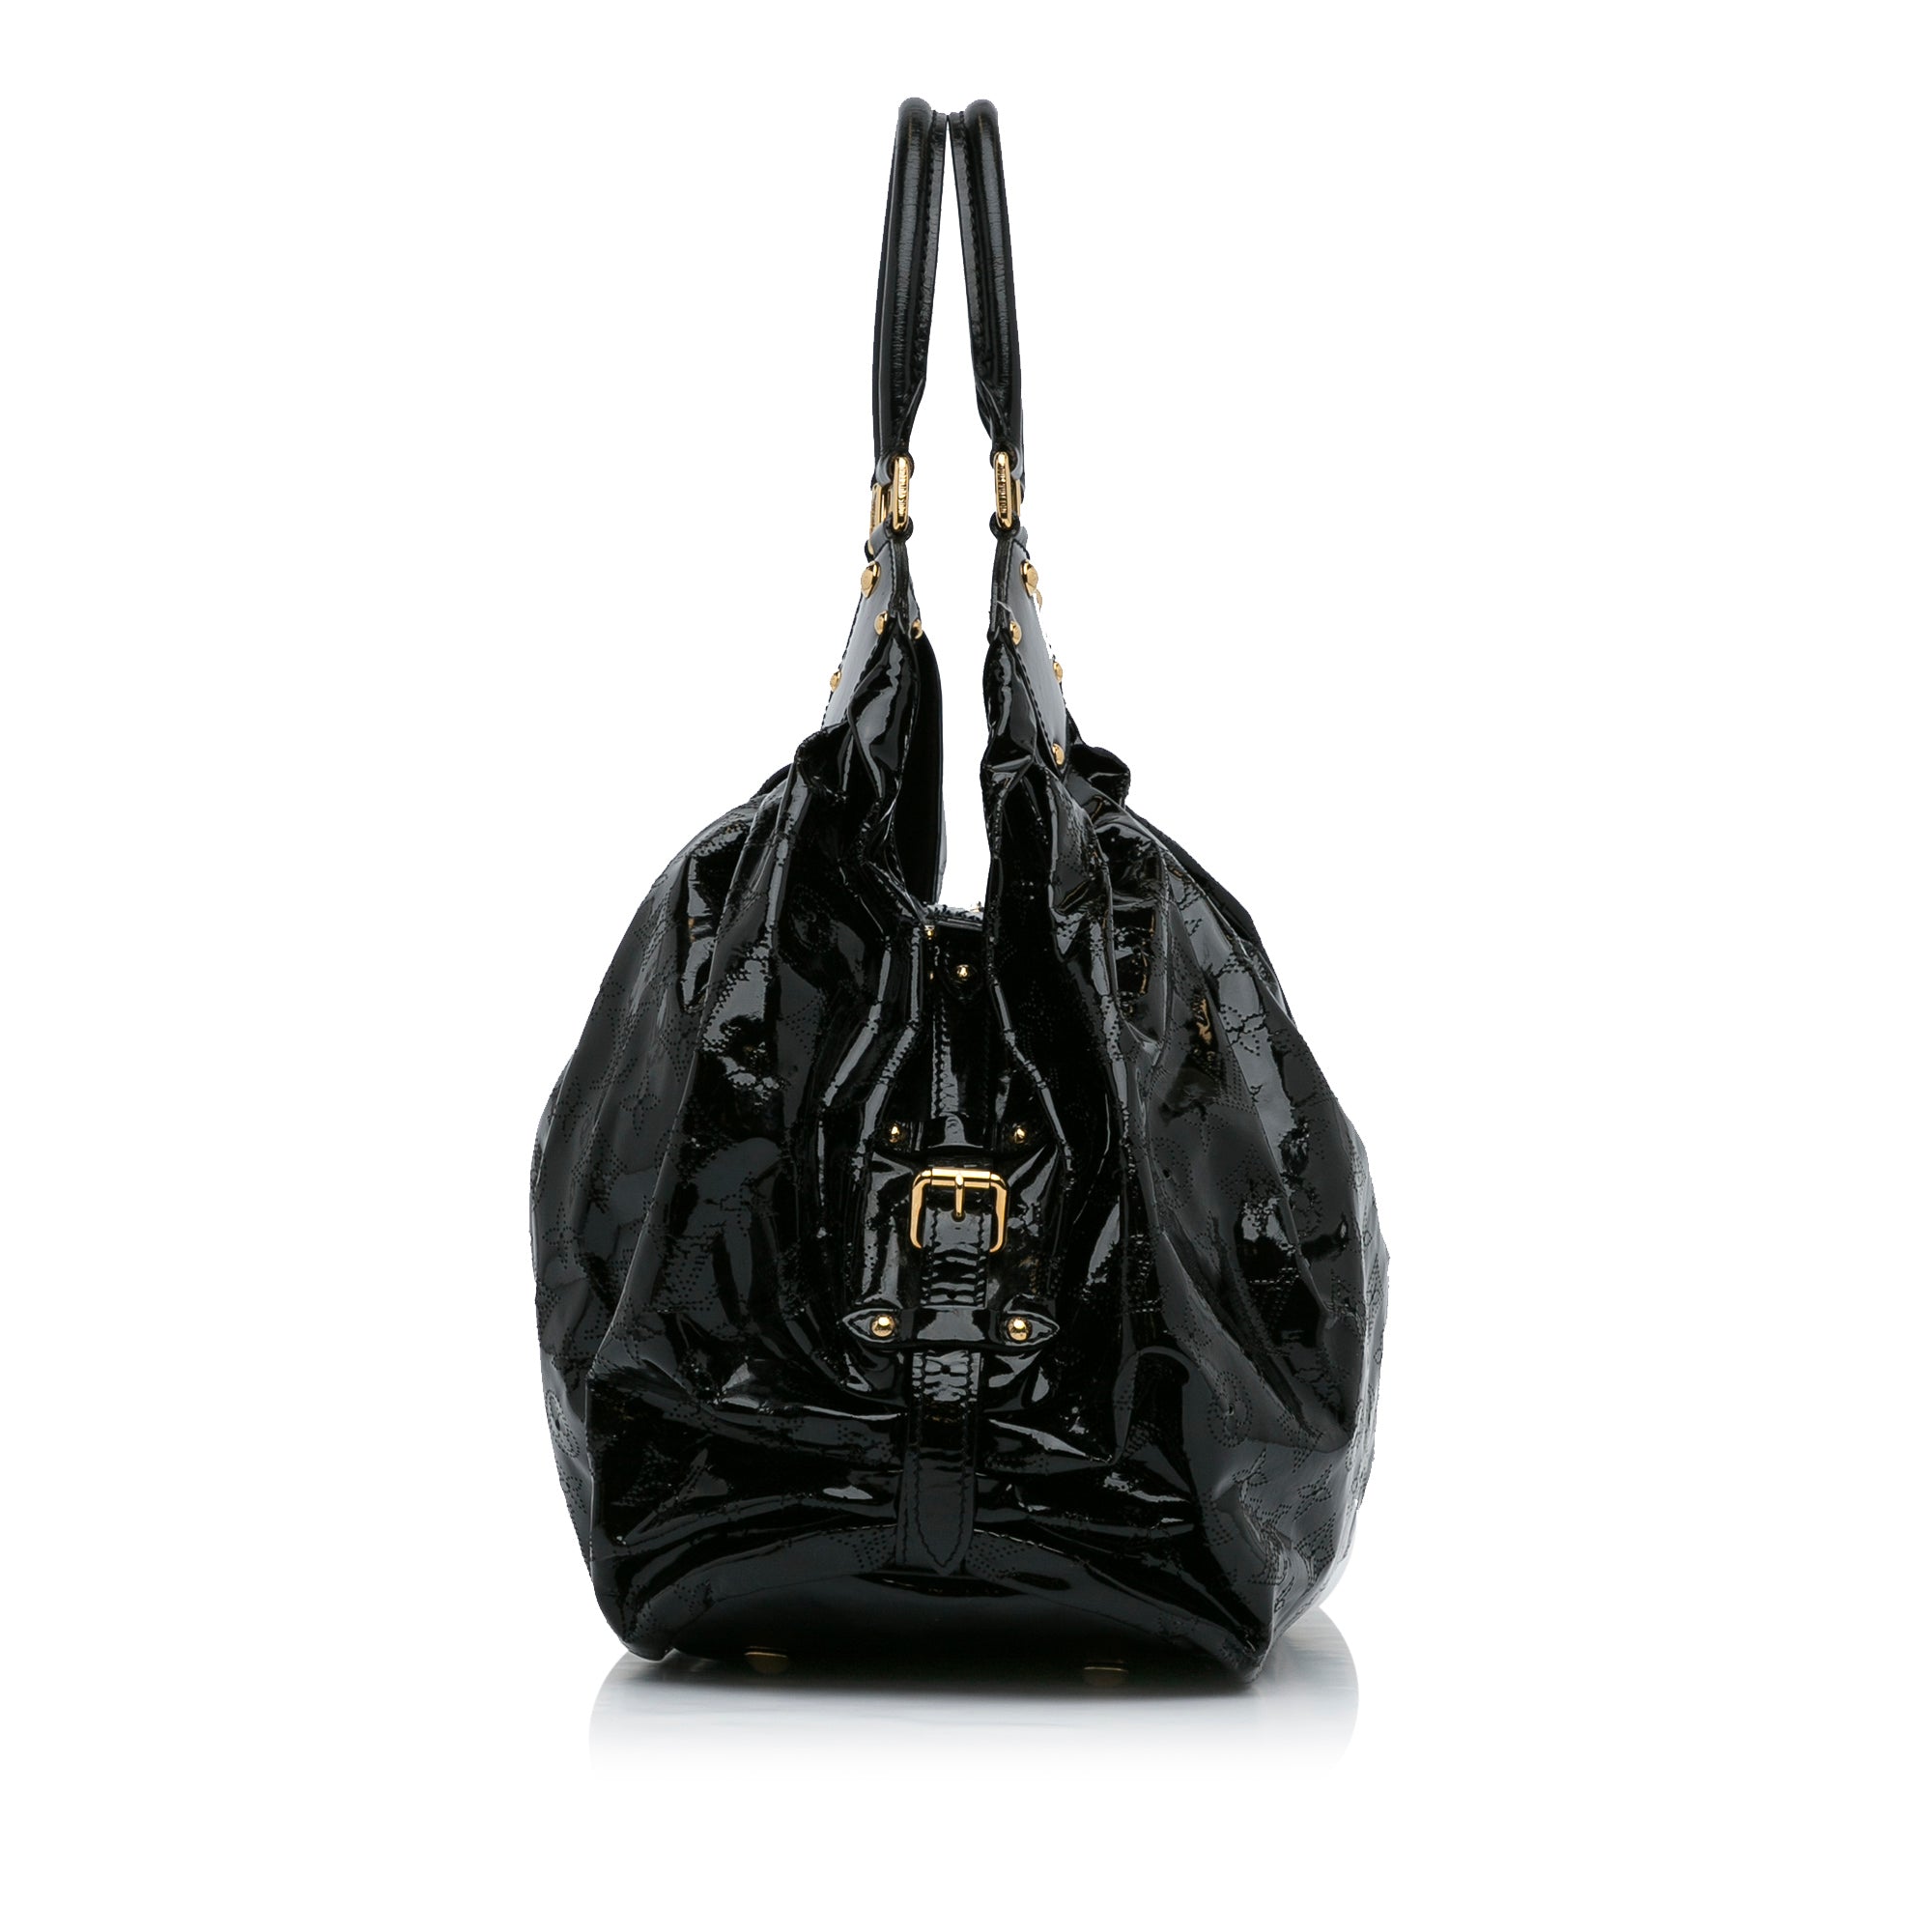 Pre-owned LOUIS VUITTON Surya Mahina Black Leather Shoulder Tote